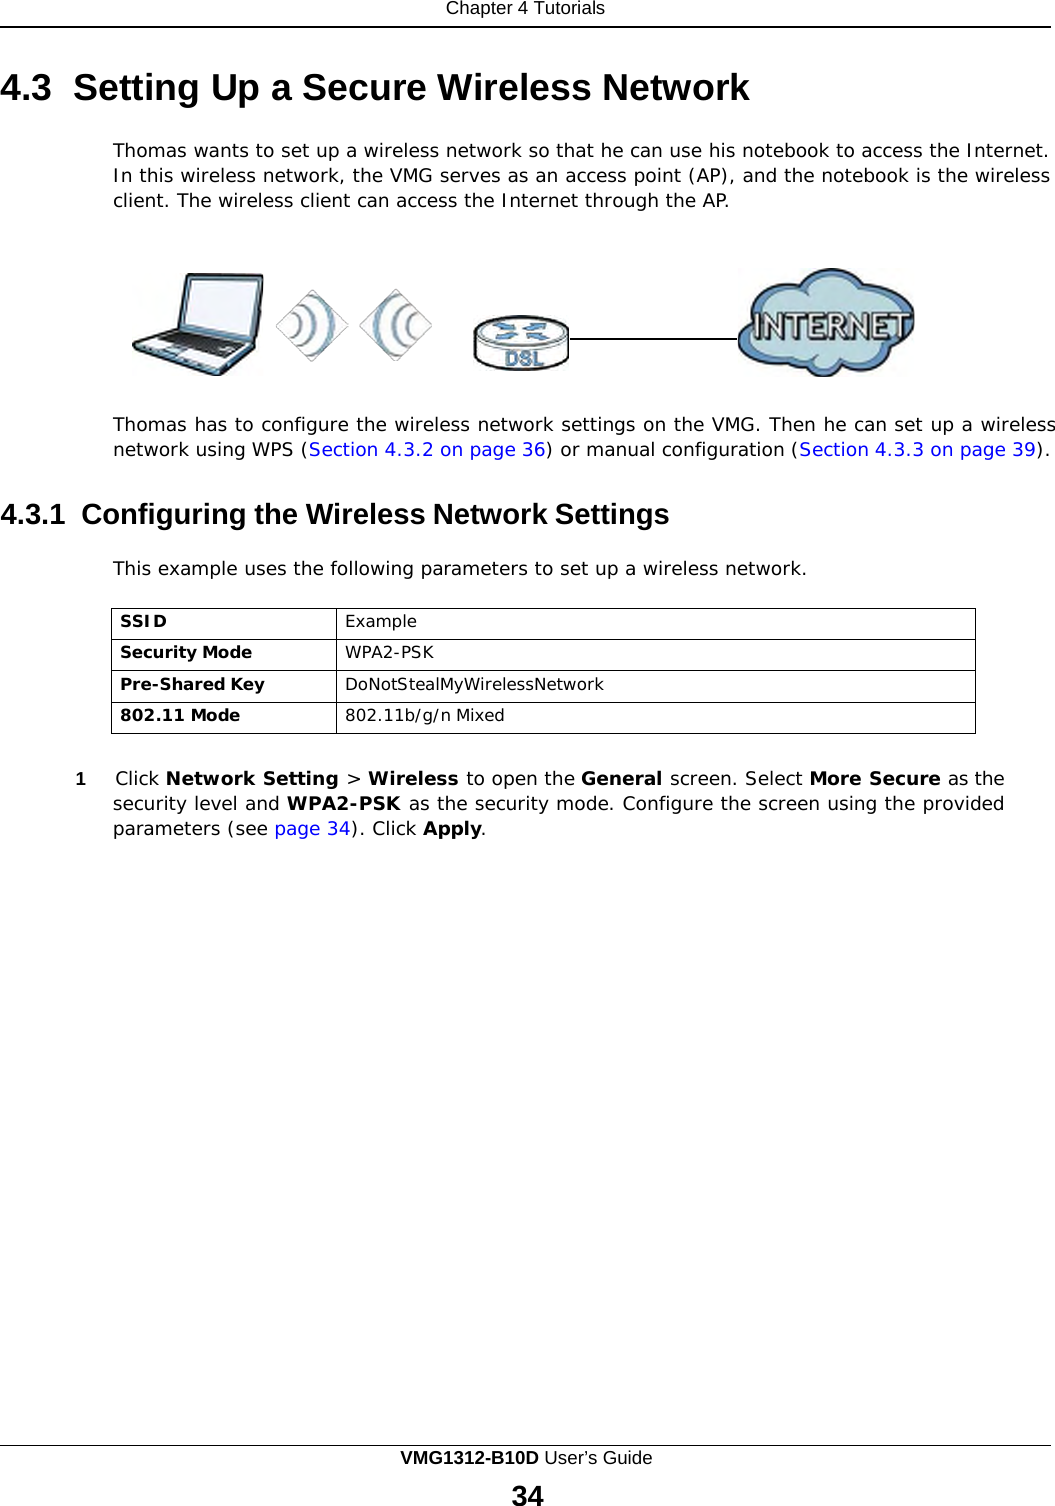 Chapter 4 Tutorials            4.3  Setting Up a Secure Wireless Network  Thomas wants to set up a wireless network so that he can use his notebook to access the Internet. In this wireless network, the VMG serves as an access point (AP), and the notebook is the wireless client. The wireless client can access the Internet through the AP.       Thomas has to configure the wireless network settings on the VMG. Then he can set up a wireless network using WPS (Section 4.3.2 on page 36) or manual configuration (Section 4.3.3 on page 39).   4.3.1  Configuring the Wireless Network Settings  This example uses the following parameters to set up a wireless network.  SSID Example Security Mode WPA2-PSK Pre-Shared Key DoNotStealMyWirelessNetwork 802.11 Mode 802.11b/g/n Mixed   1     Click Network Setting &gt; Wireless to open the General screen. Select More Secure as the security level and WPA2-PSK as the security mode. Configure the screen using the provided parameters (see page 34). Click Apply. VMG1312-B10D User’s Guide 34  